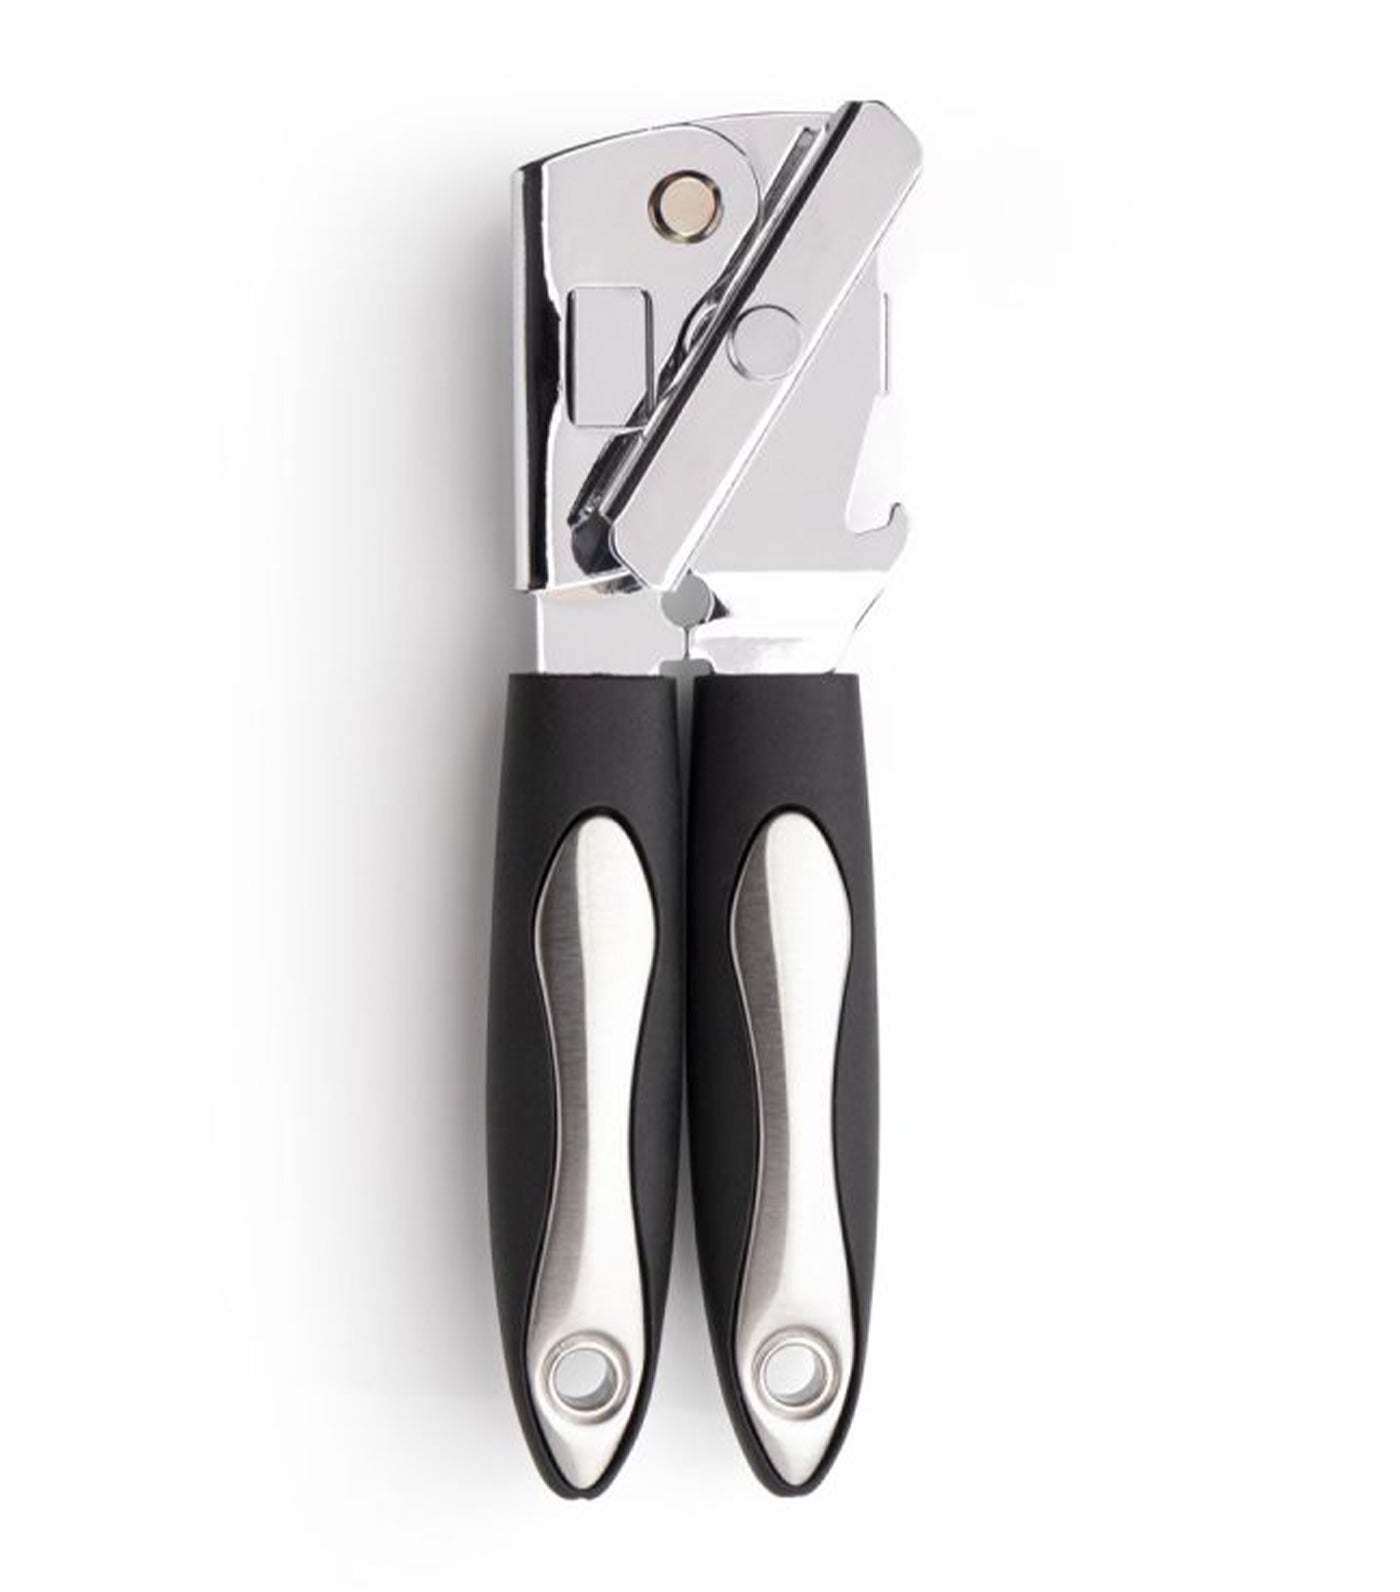 Taylor's Eye Witness Professional Non-Scratch Stainless Steel Utensils & Tools